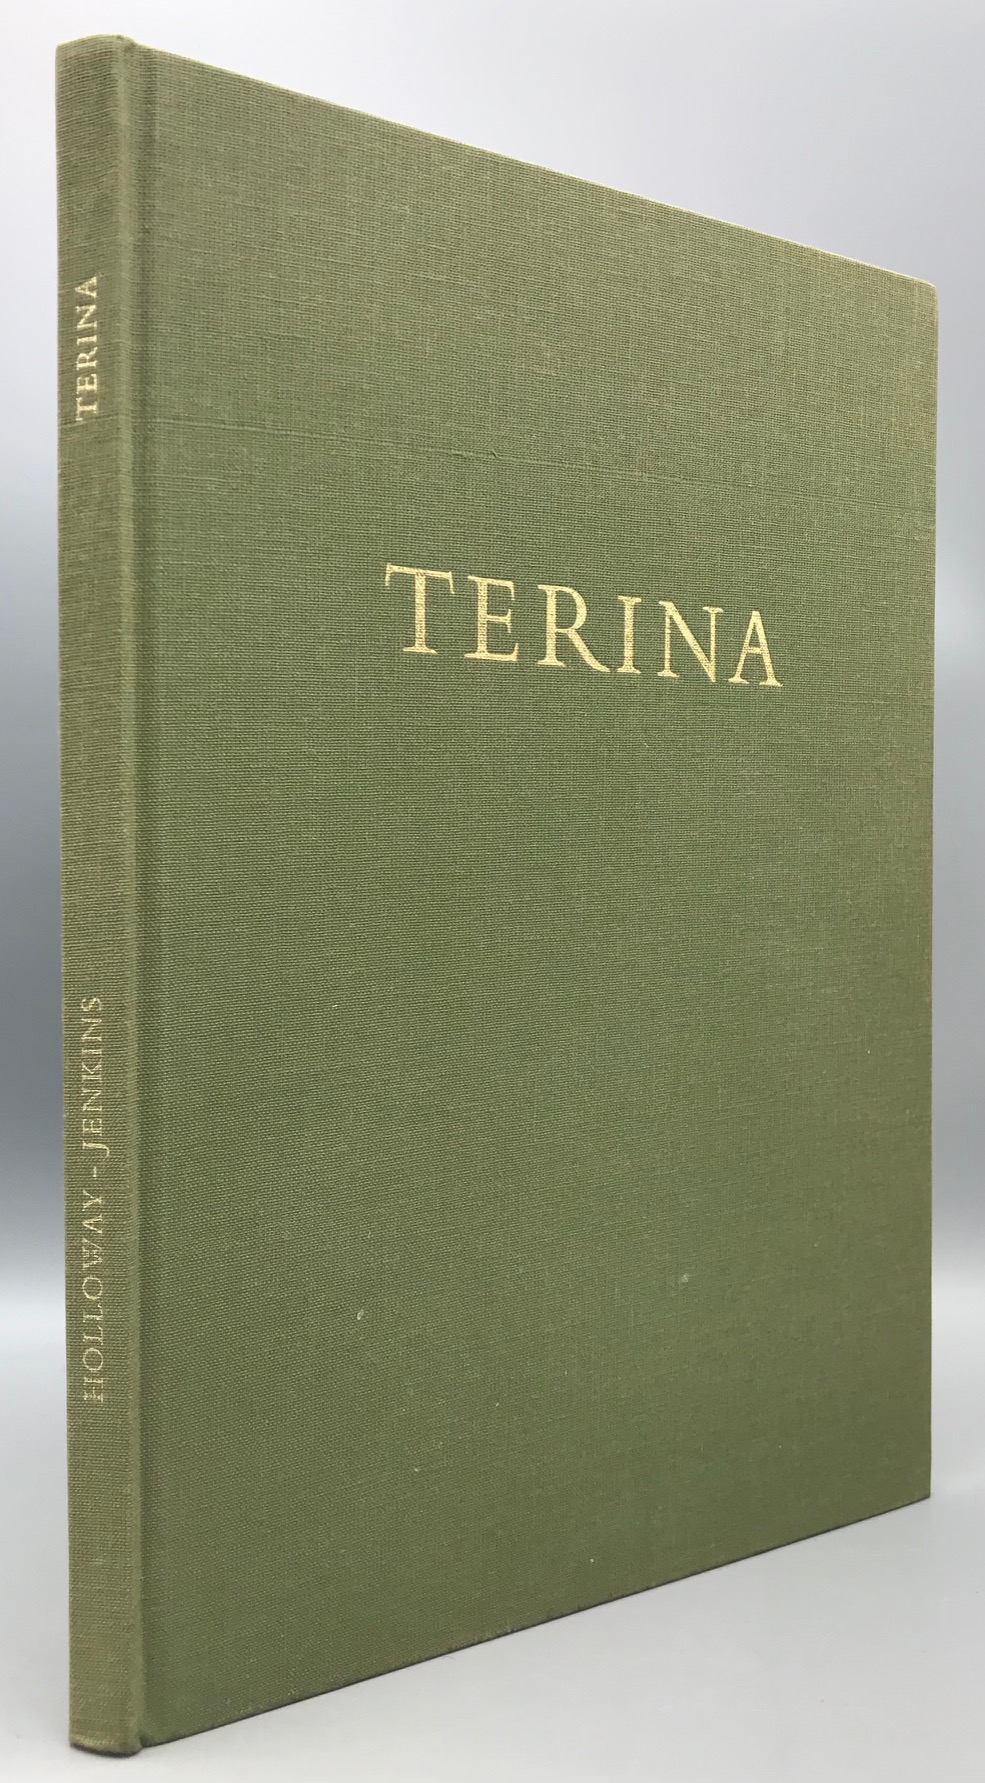 TERINA, by R. Ross Holloway & G. Kenneth Jenkins - 1983 [Illustrated]